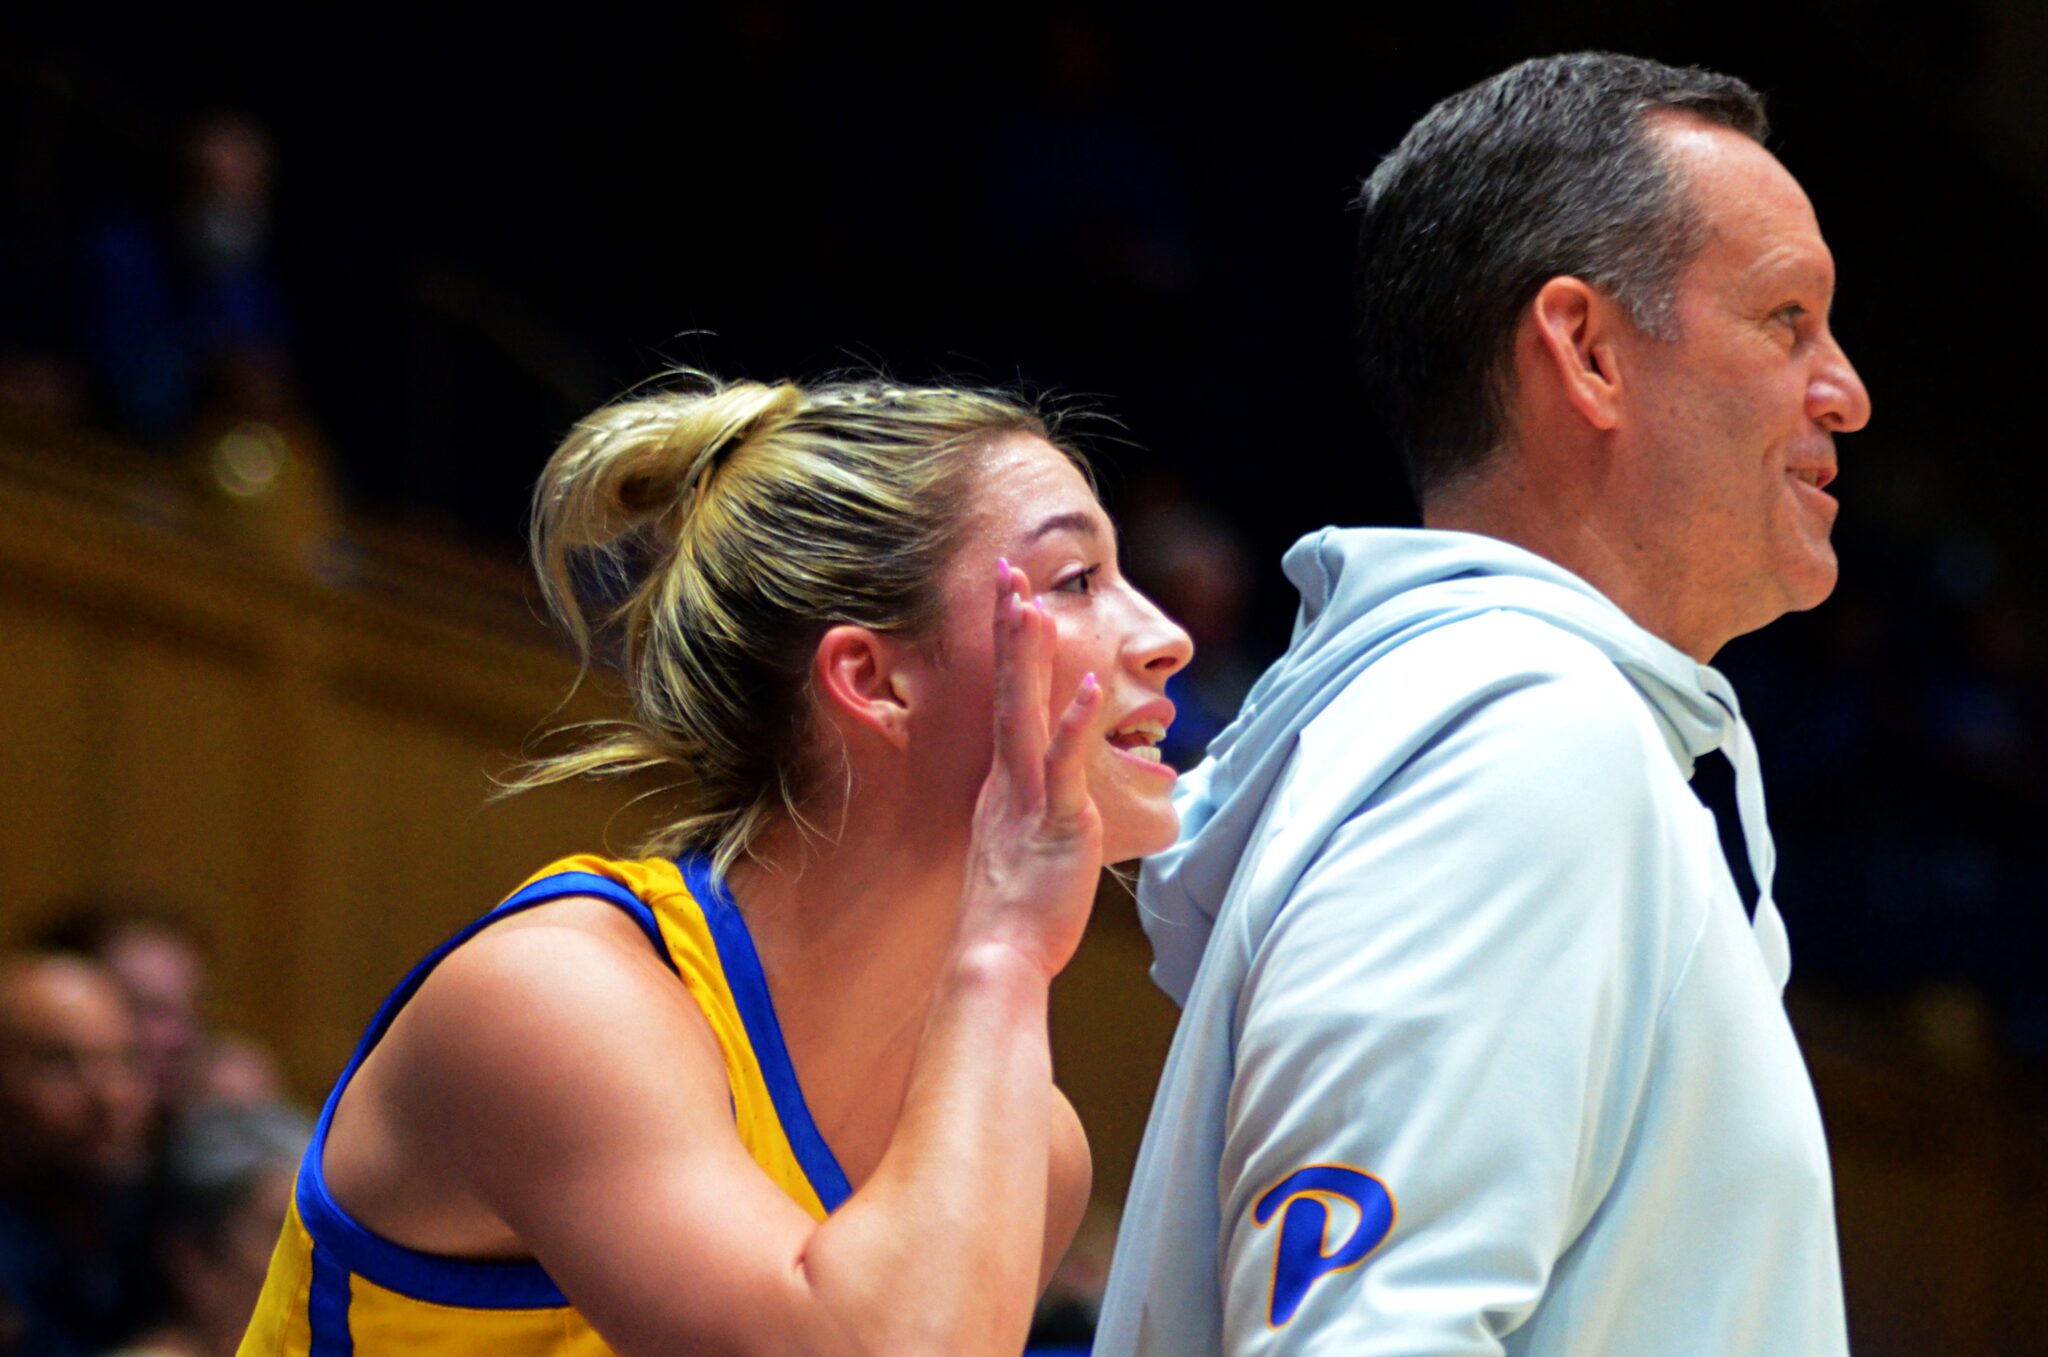 Marley Washenitz stands next to Pitt coach Lance White and calls out to her teammates at Duke on Feb. 2, 2023. (Mitchell Northam / Pittsburgh Sports Now)